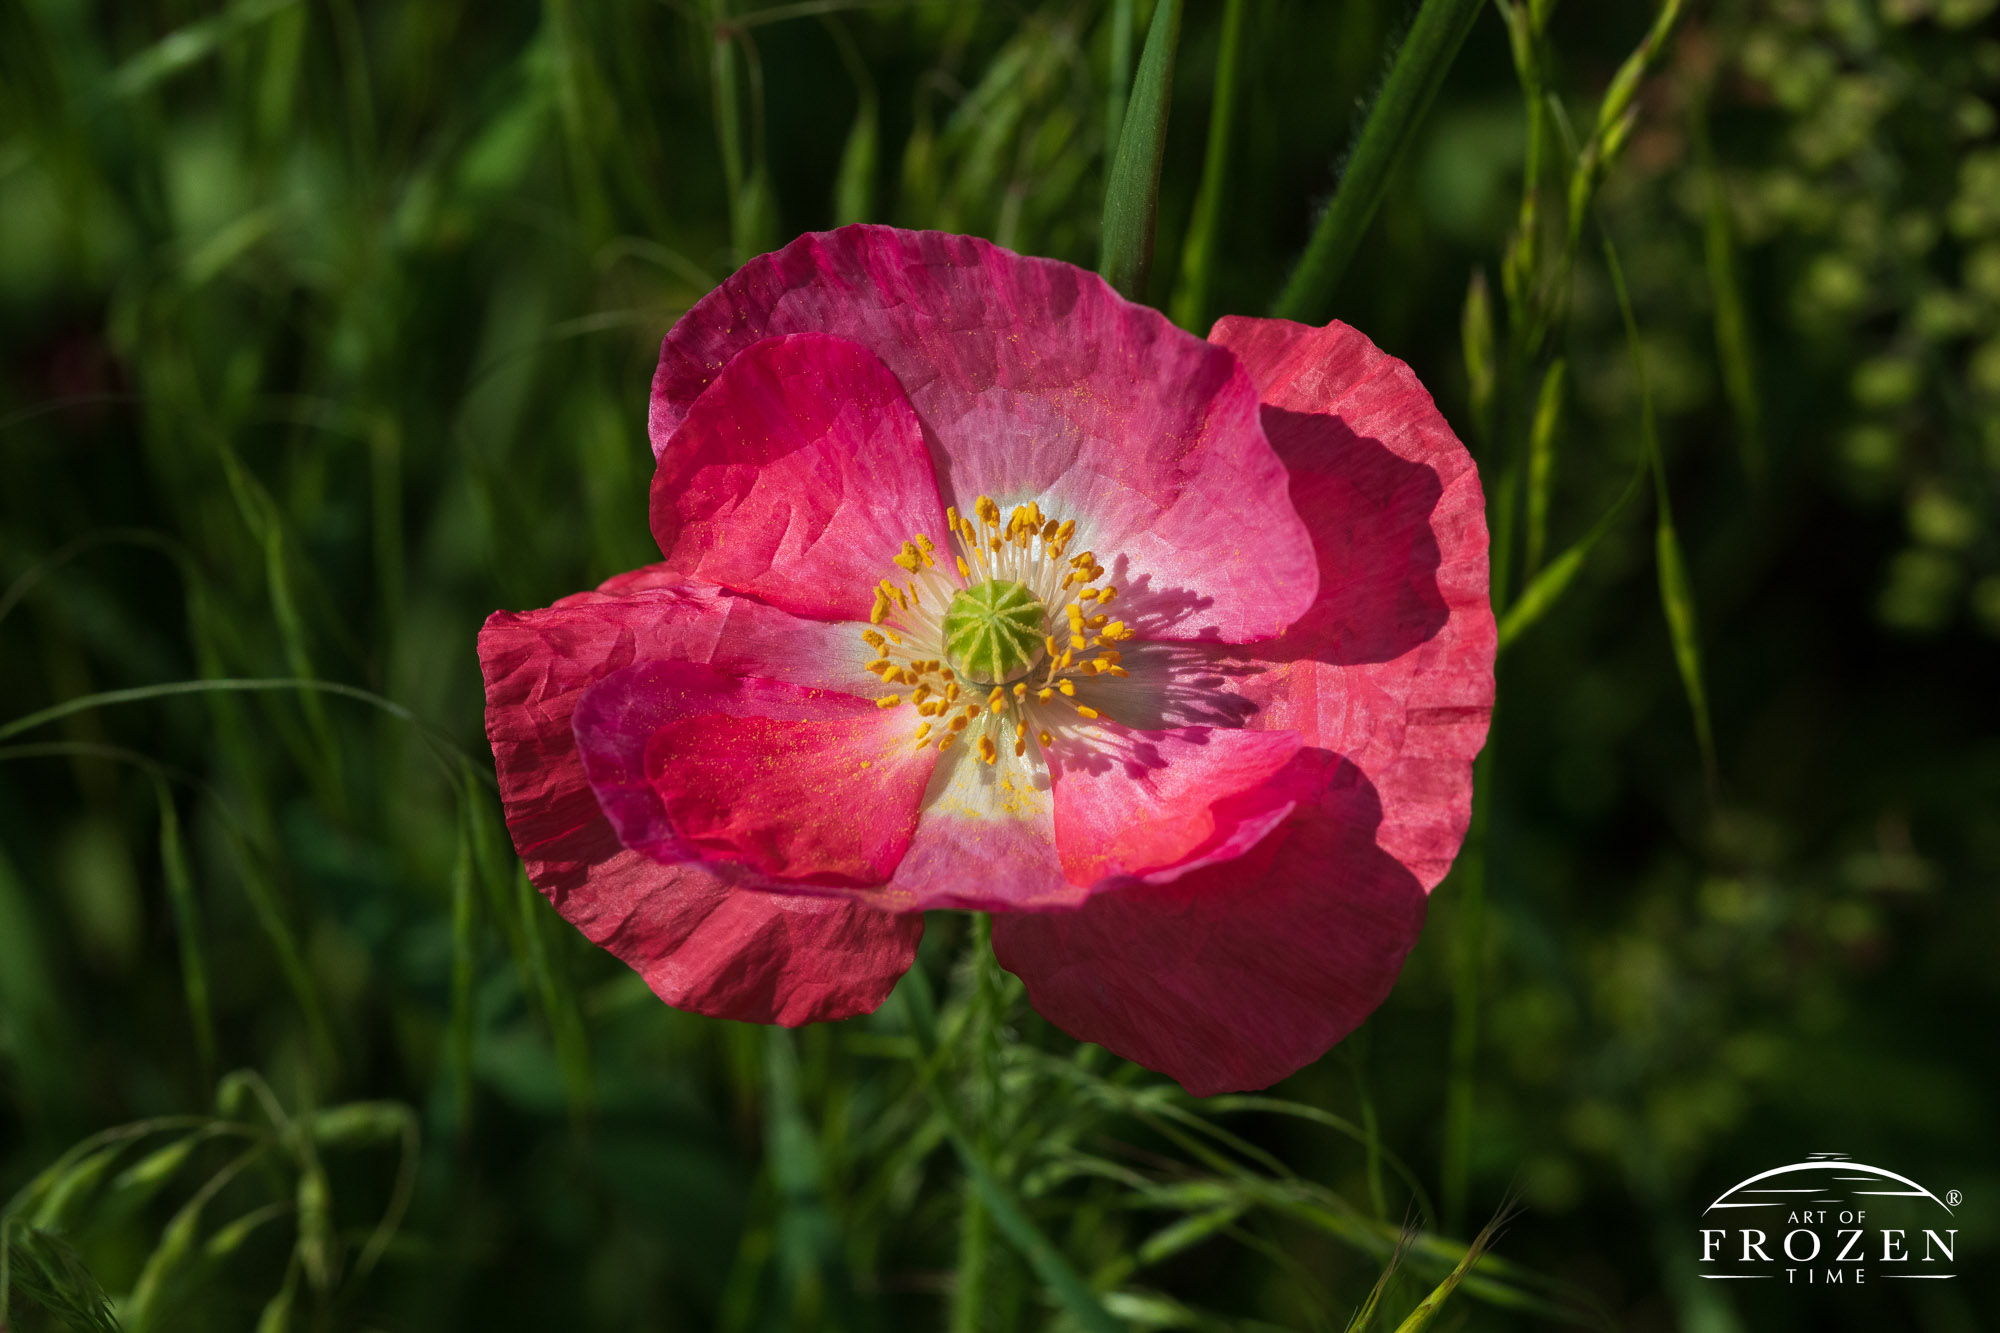 A close view of a single red poppy featuring a yellow center basking in the summer sun.